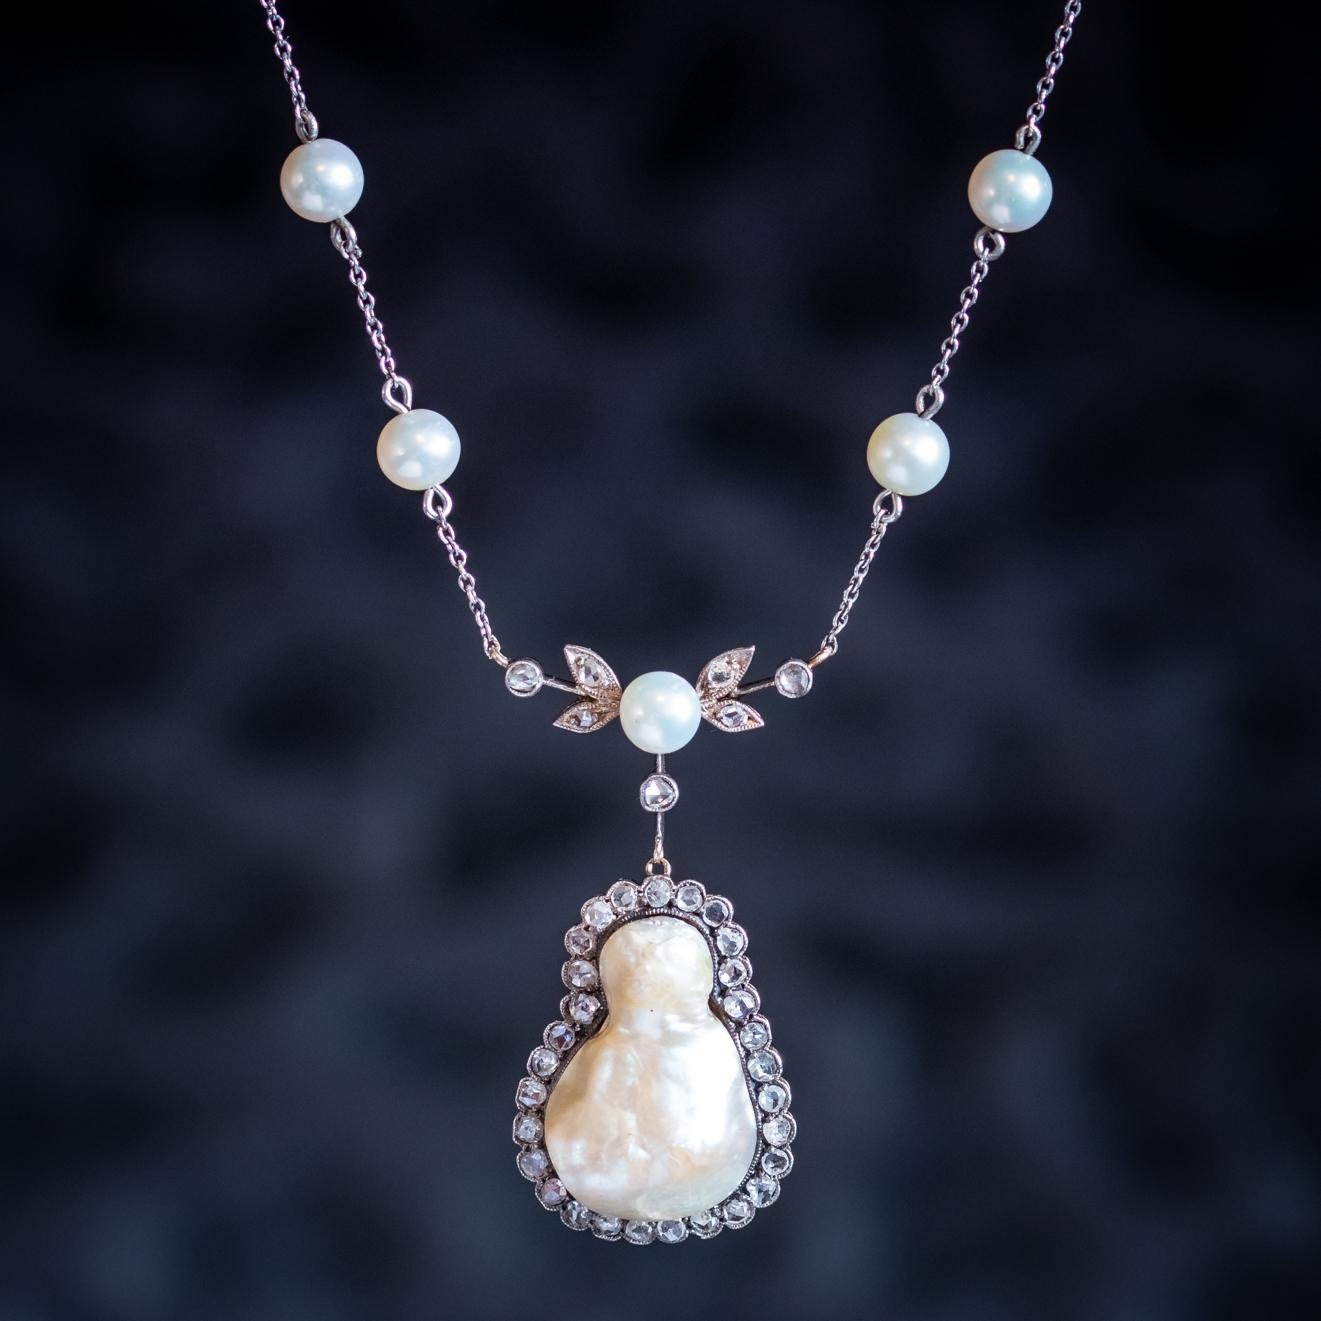 A fabulous Lavaliere necklace from the early 20th Century featuring a wonderful pear-shaped pendant set with an irregular shaped Baroque Pearl haloed with twinkling Rose cut Diamonds.

Further Pearls and Diamonds are decorated throughout the chain